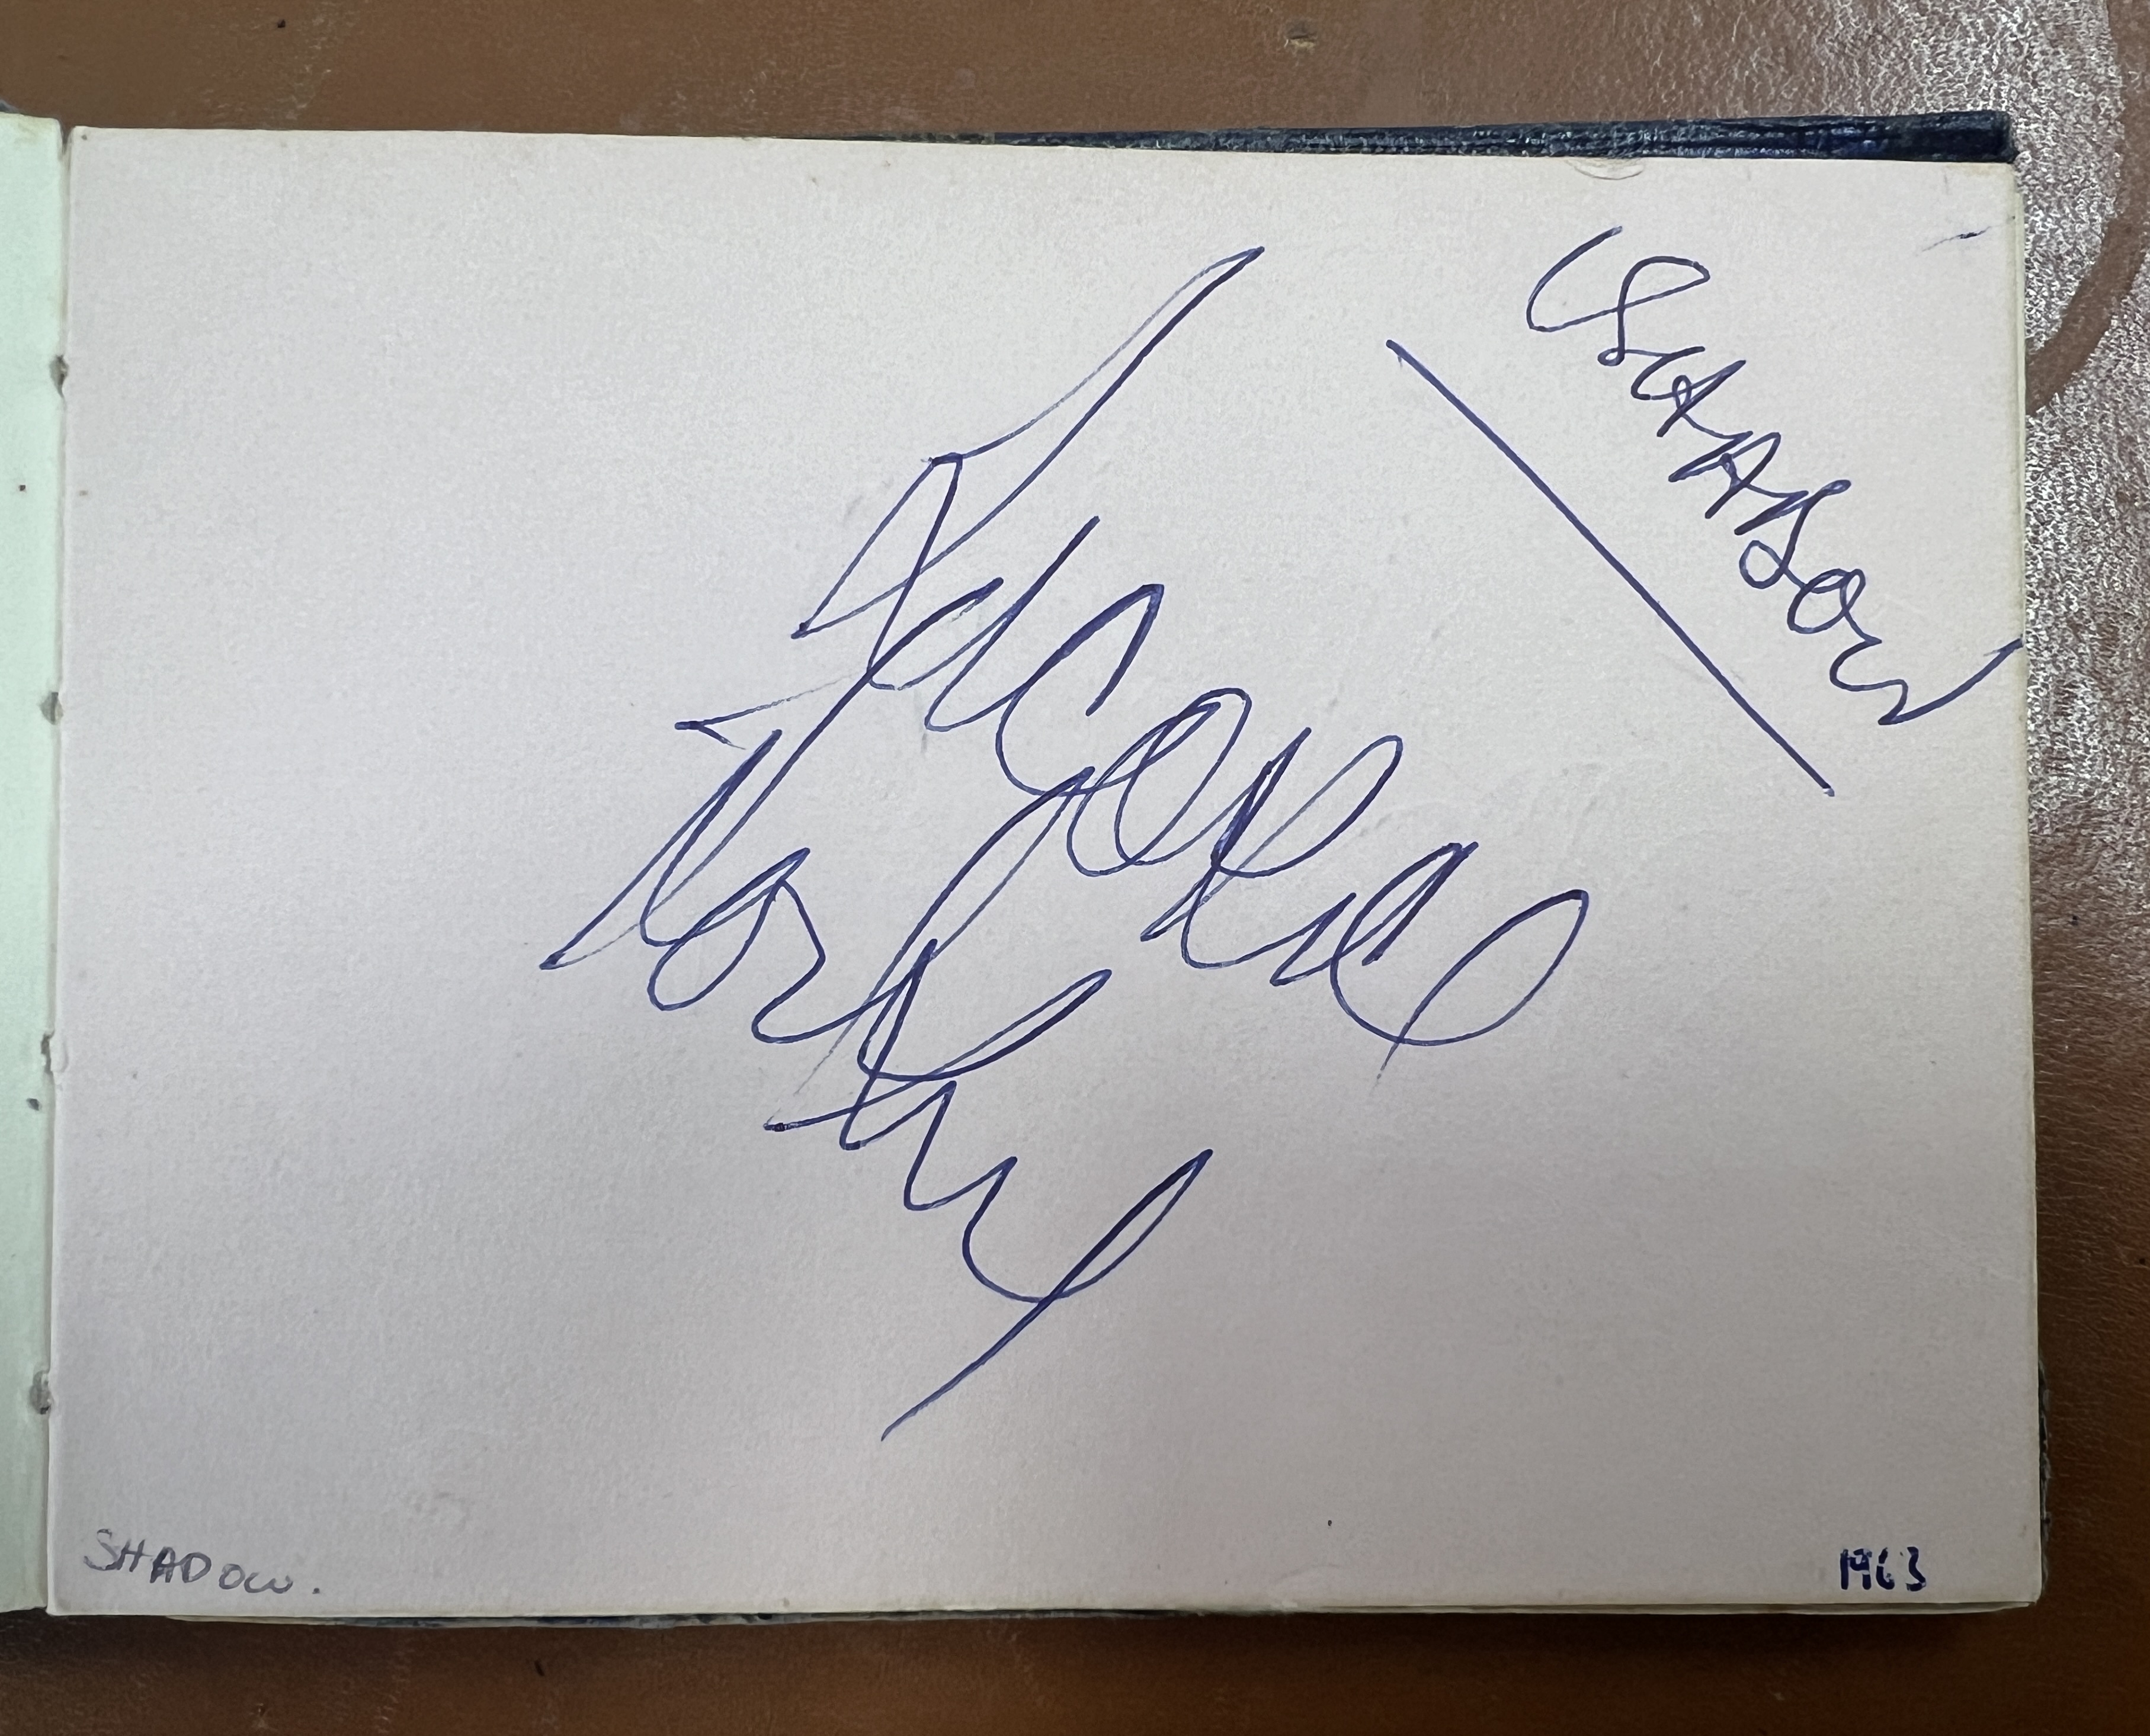 A 1960's autograph album containing autographs of various celebrities including Cliff Richard, - Image 6 of 37